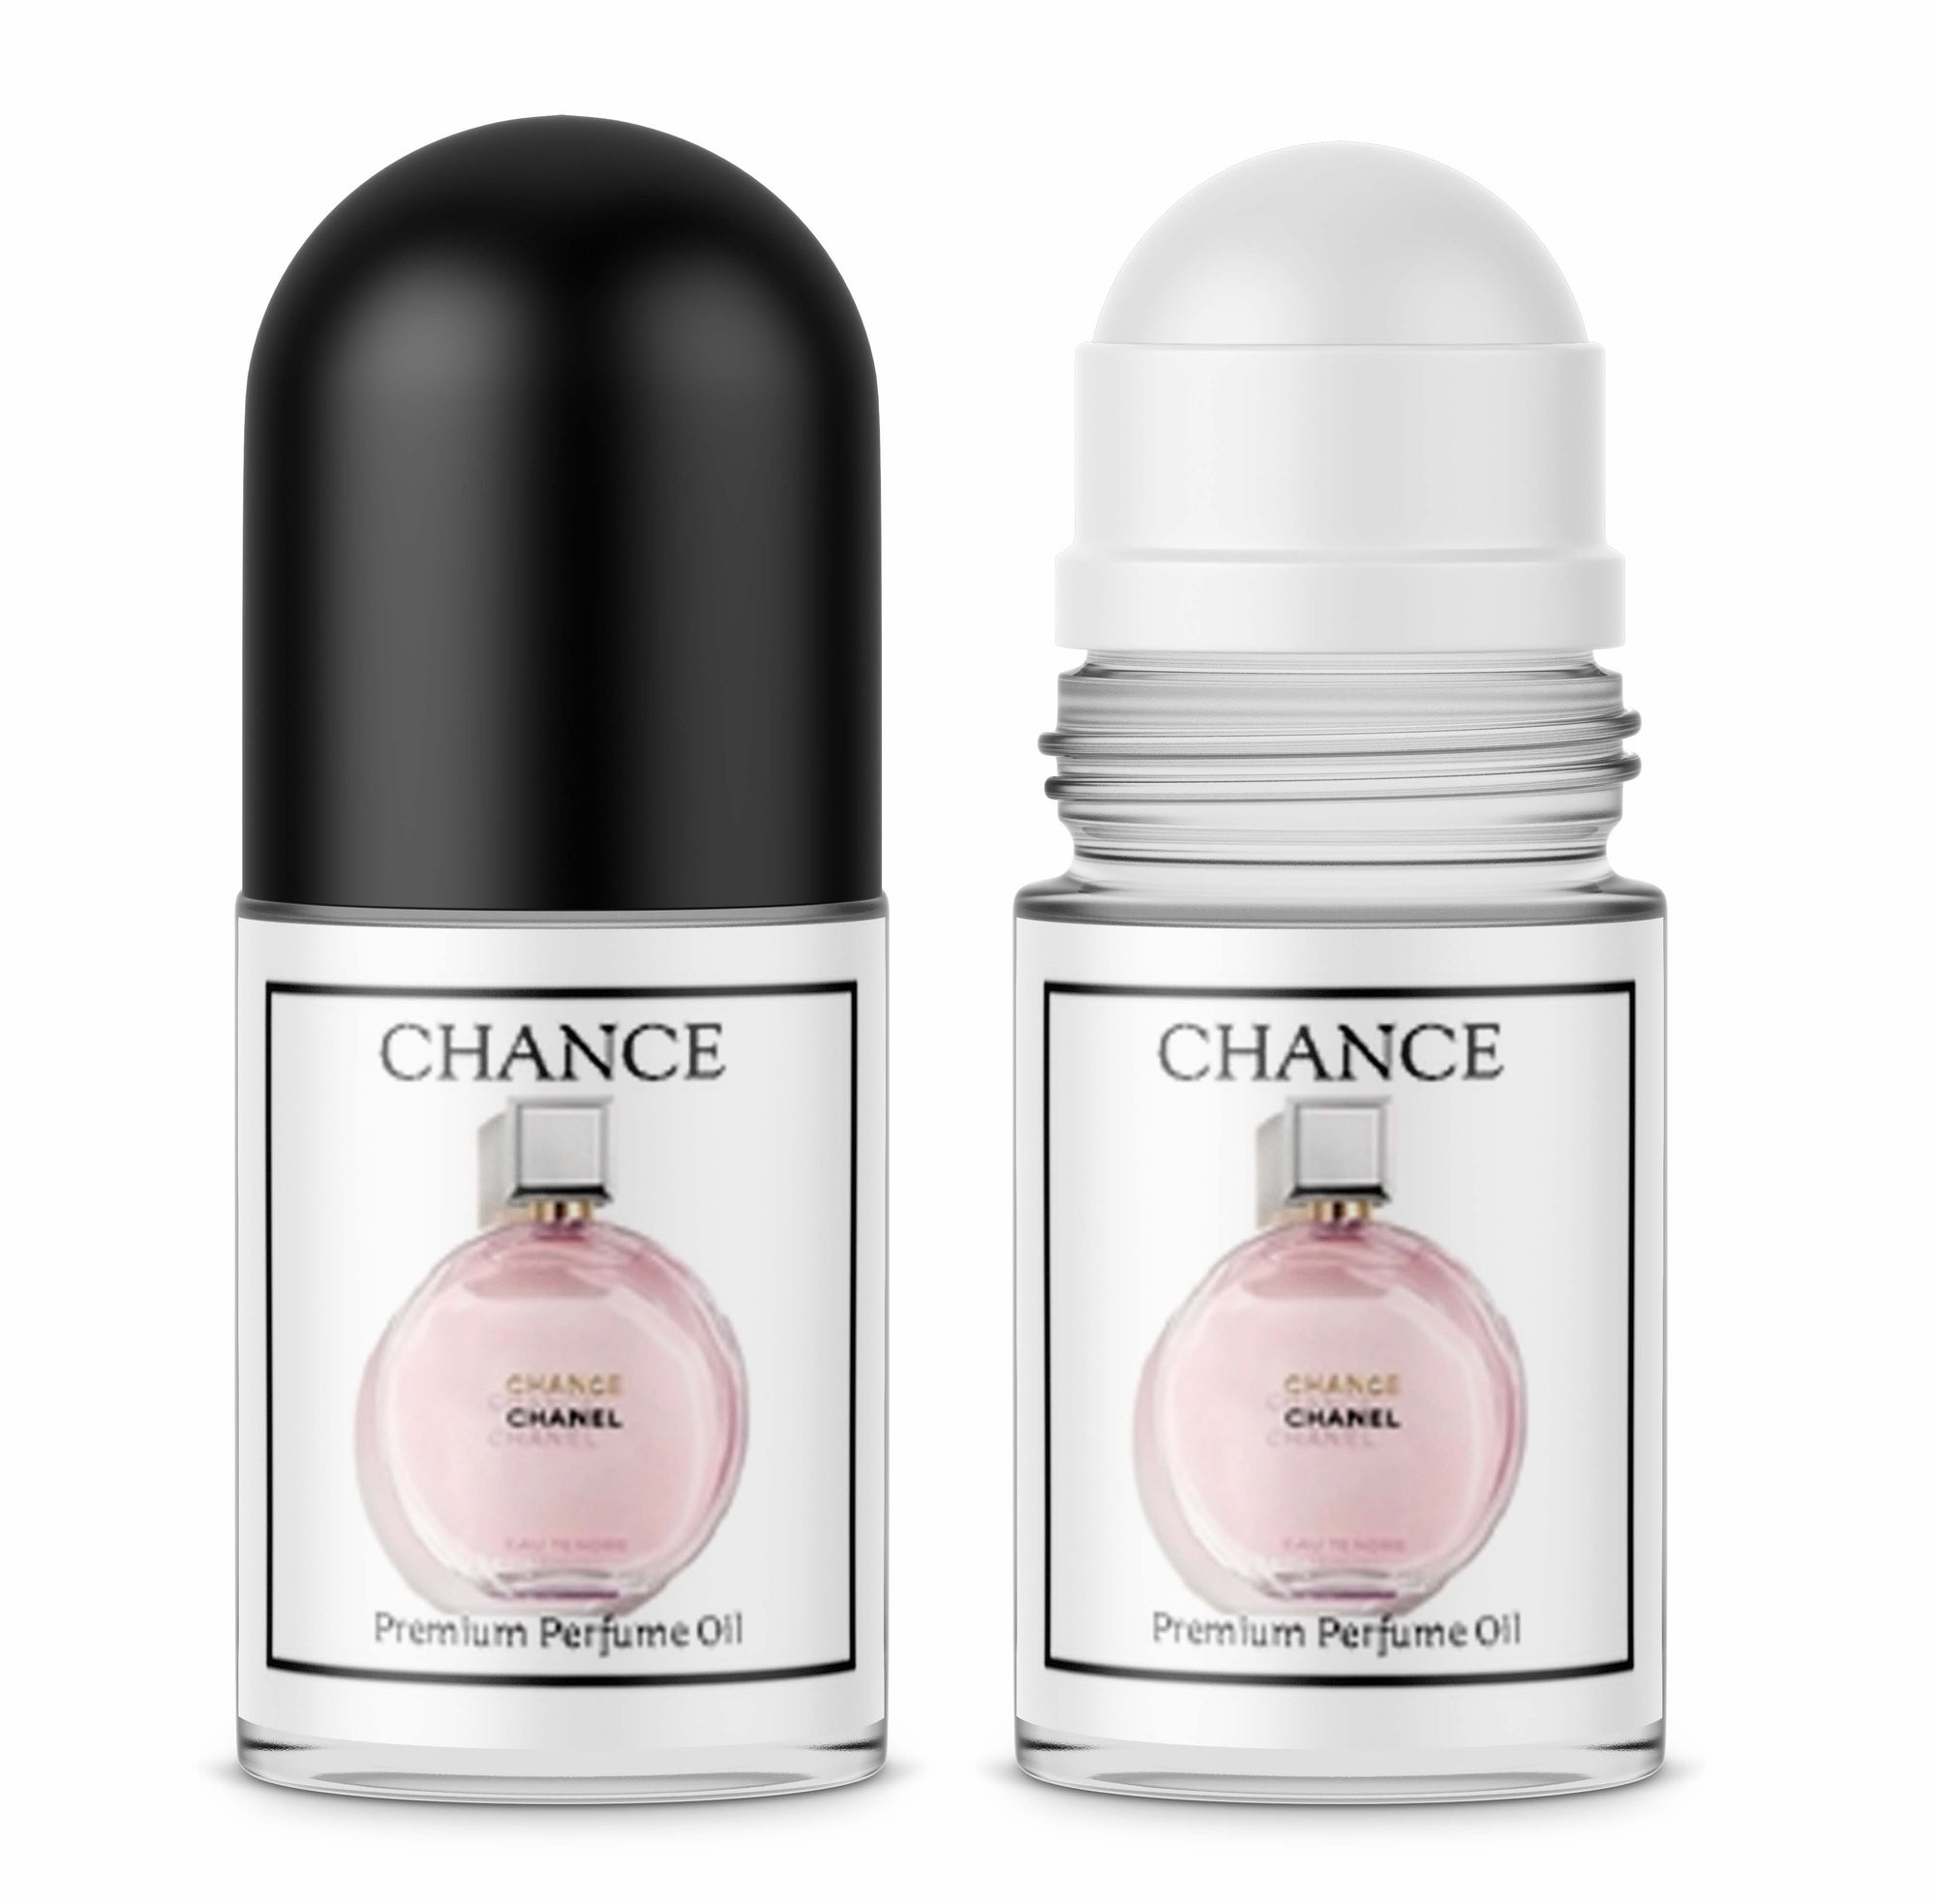 Beskæftiget Ingeniører te Chanel Chance Roll On Perfume Oil - Natural Sister's / Nature's Lab Store